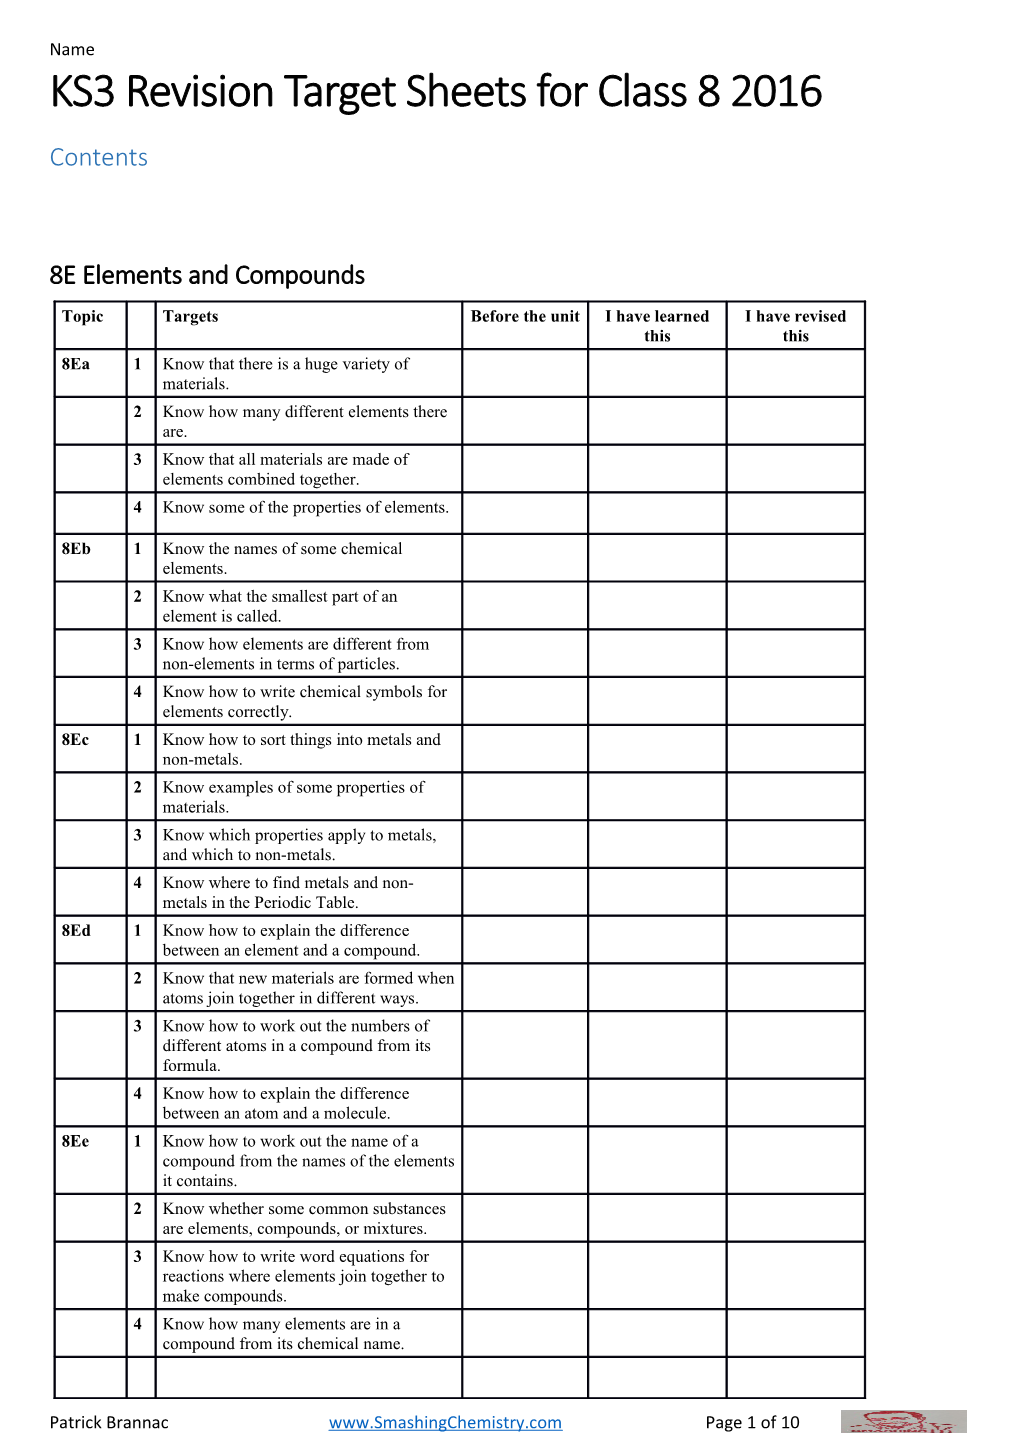 KS3 Revisiontarget Sheets for Class 8 2016